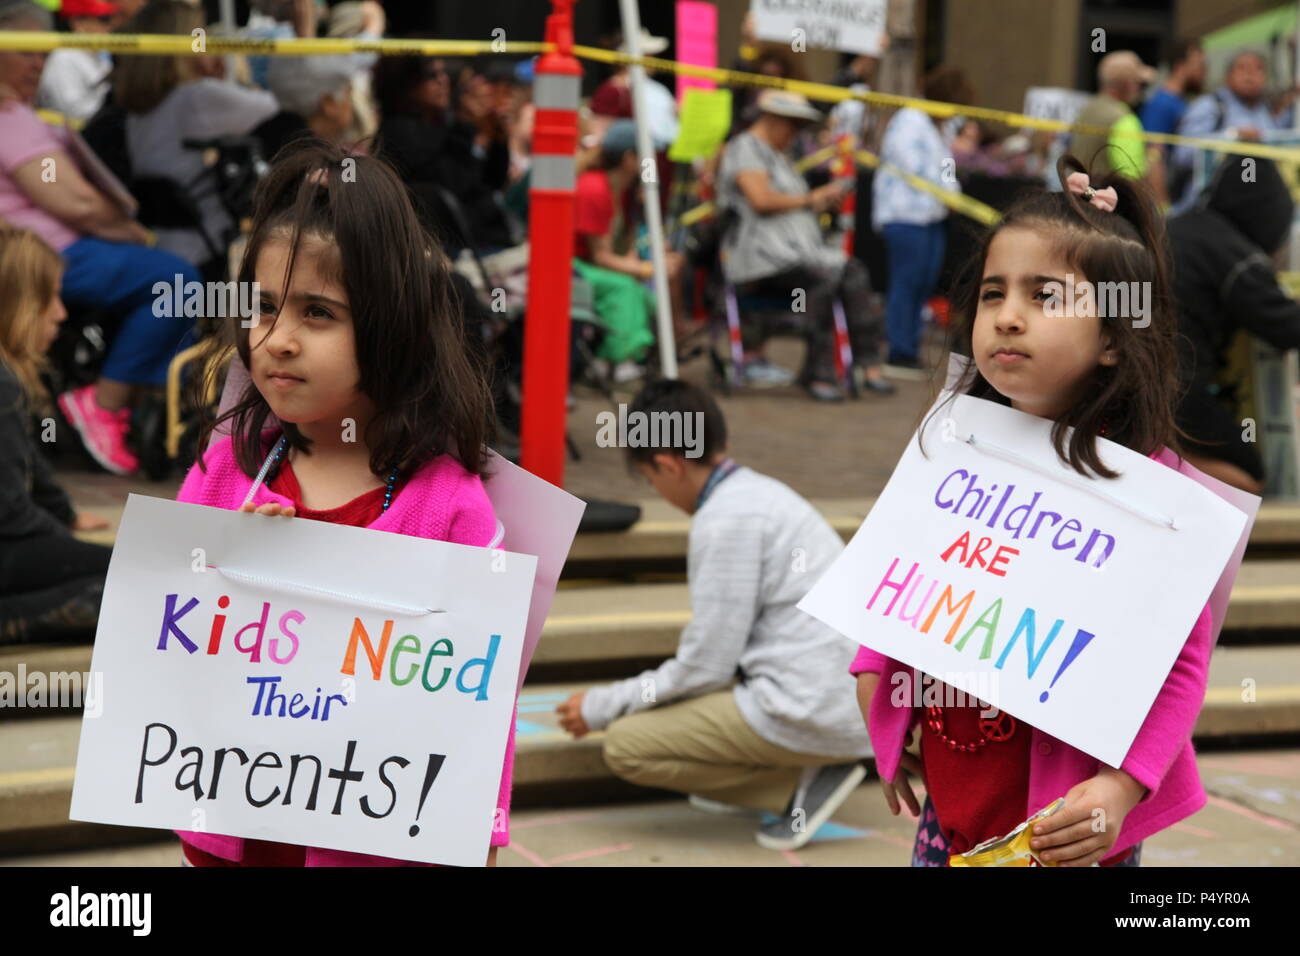 San Diego, USA. 23rd June, 2018. Two girls take part in the 'Families Belong Together' protest in San Diego, the United States, on June 23, 2018. Thousands of people marched in protest in the U.S.-Mexico border city of San Diego on Saturday, raising slogans against the Trump administration's policy of separating children from immigrant parents. Credit: Gao Shan/Xinhua/Alamy Live News Stock Photo